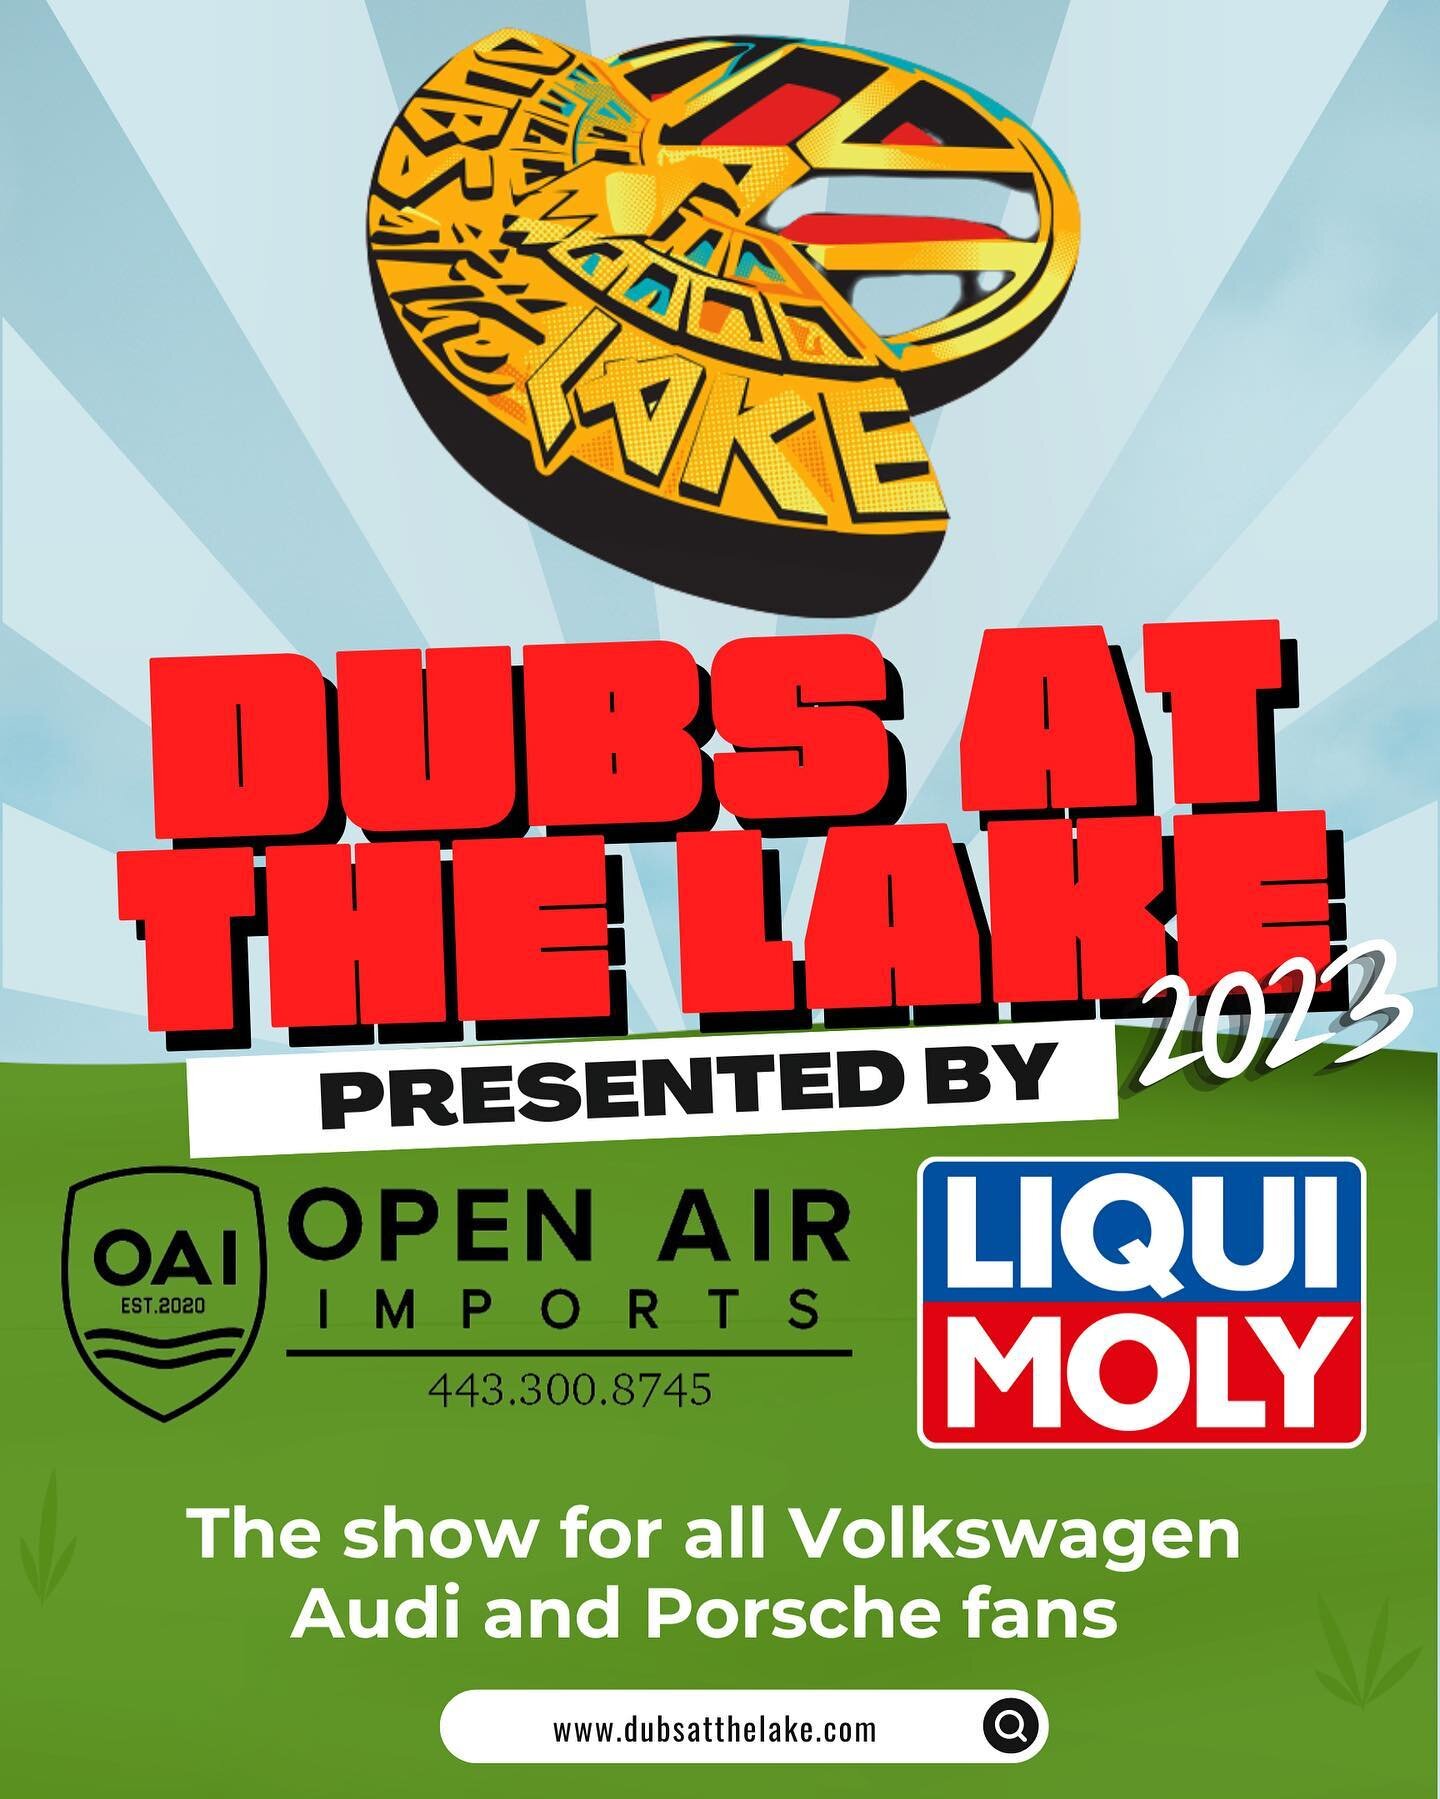 @liquimoly.USA.Canada and @open.air.imports 
Present
@dubsatthelake
May 19-21, 2023
Garrett County Fairgrounds
McHenry, Maryland 21541
WWW.DUBSATTHELAKE.COM 
DUBS AT THE LAKE , your premier Volkswagen Audi and Porsche show
Spectators are free. So bri